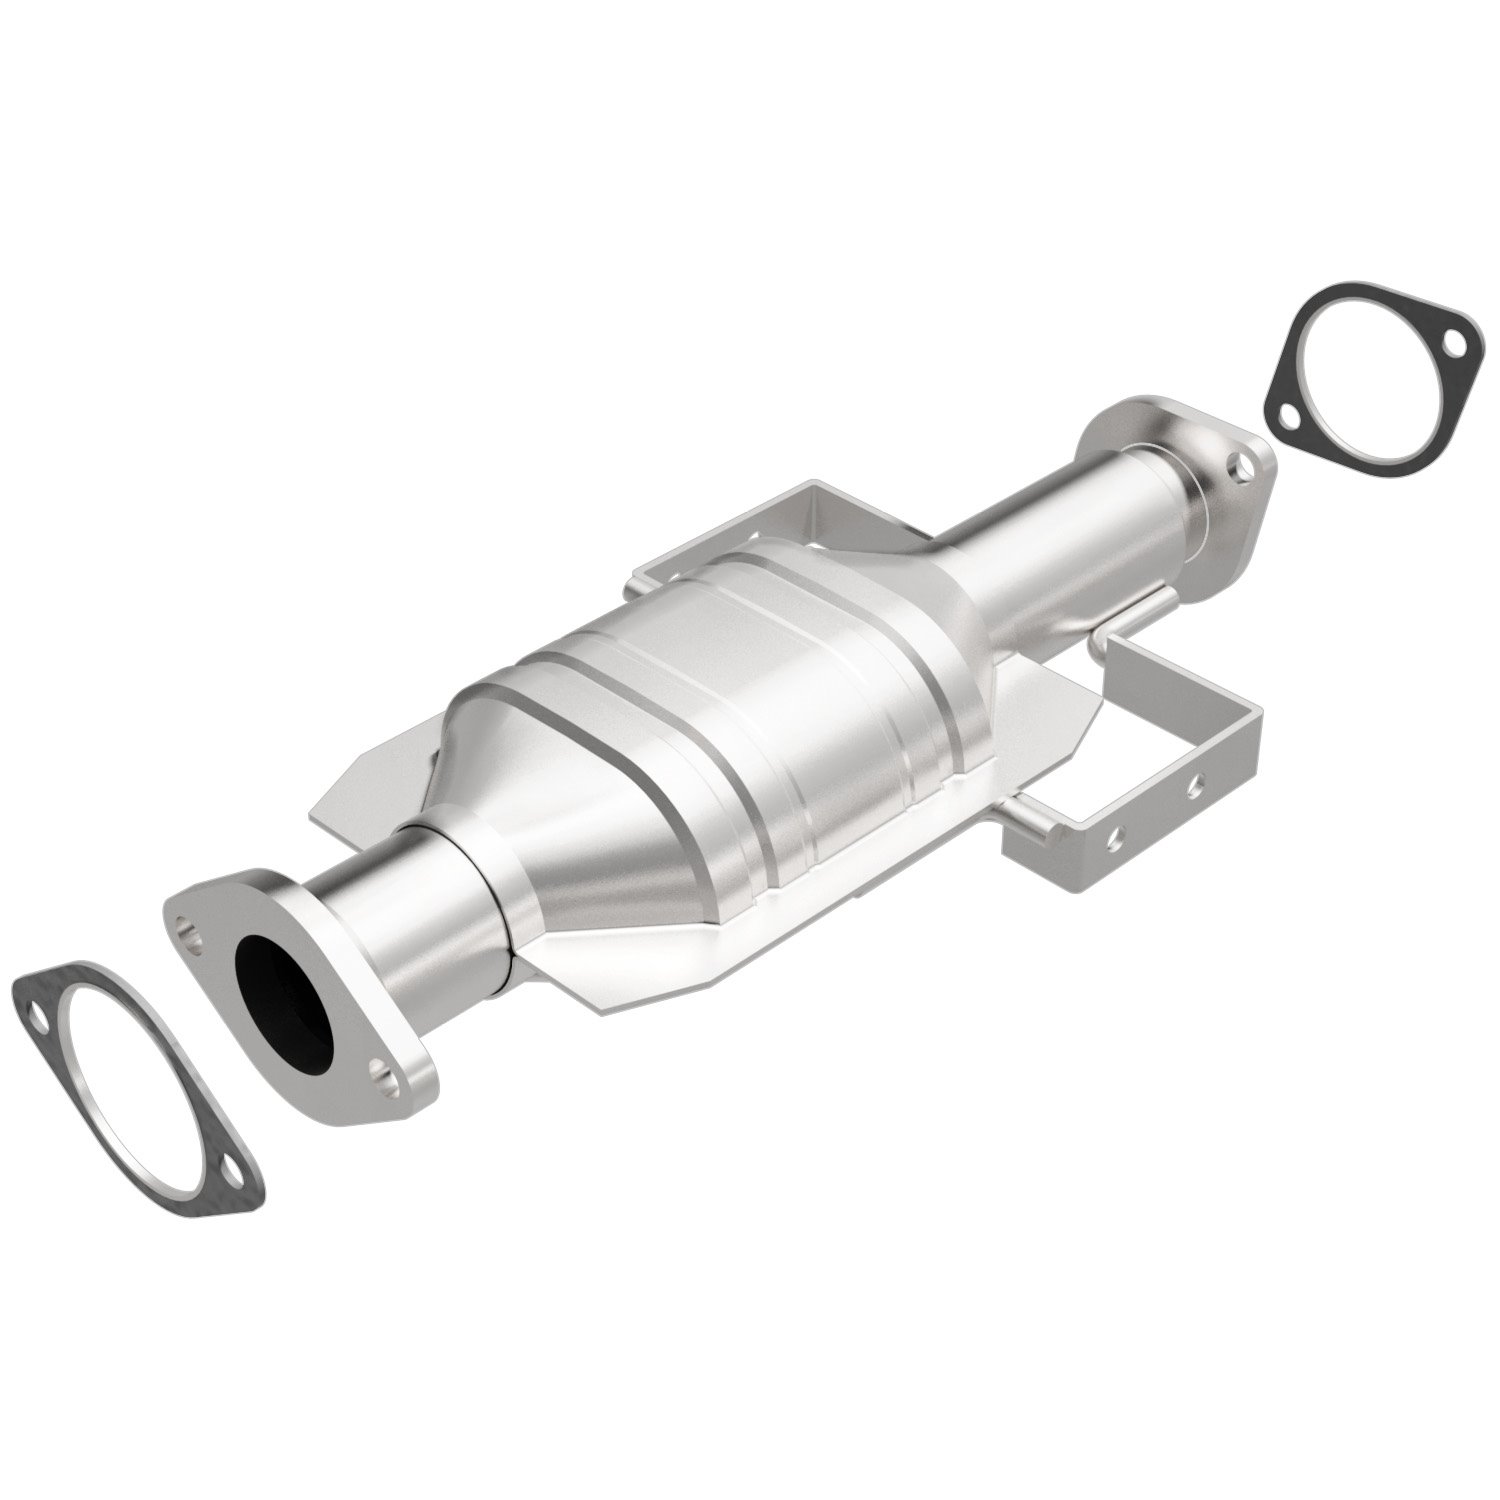 Direct-Fit Catalytic Converter 1995-98 Eagle